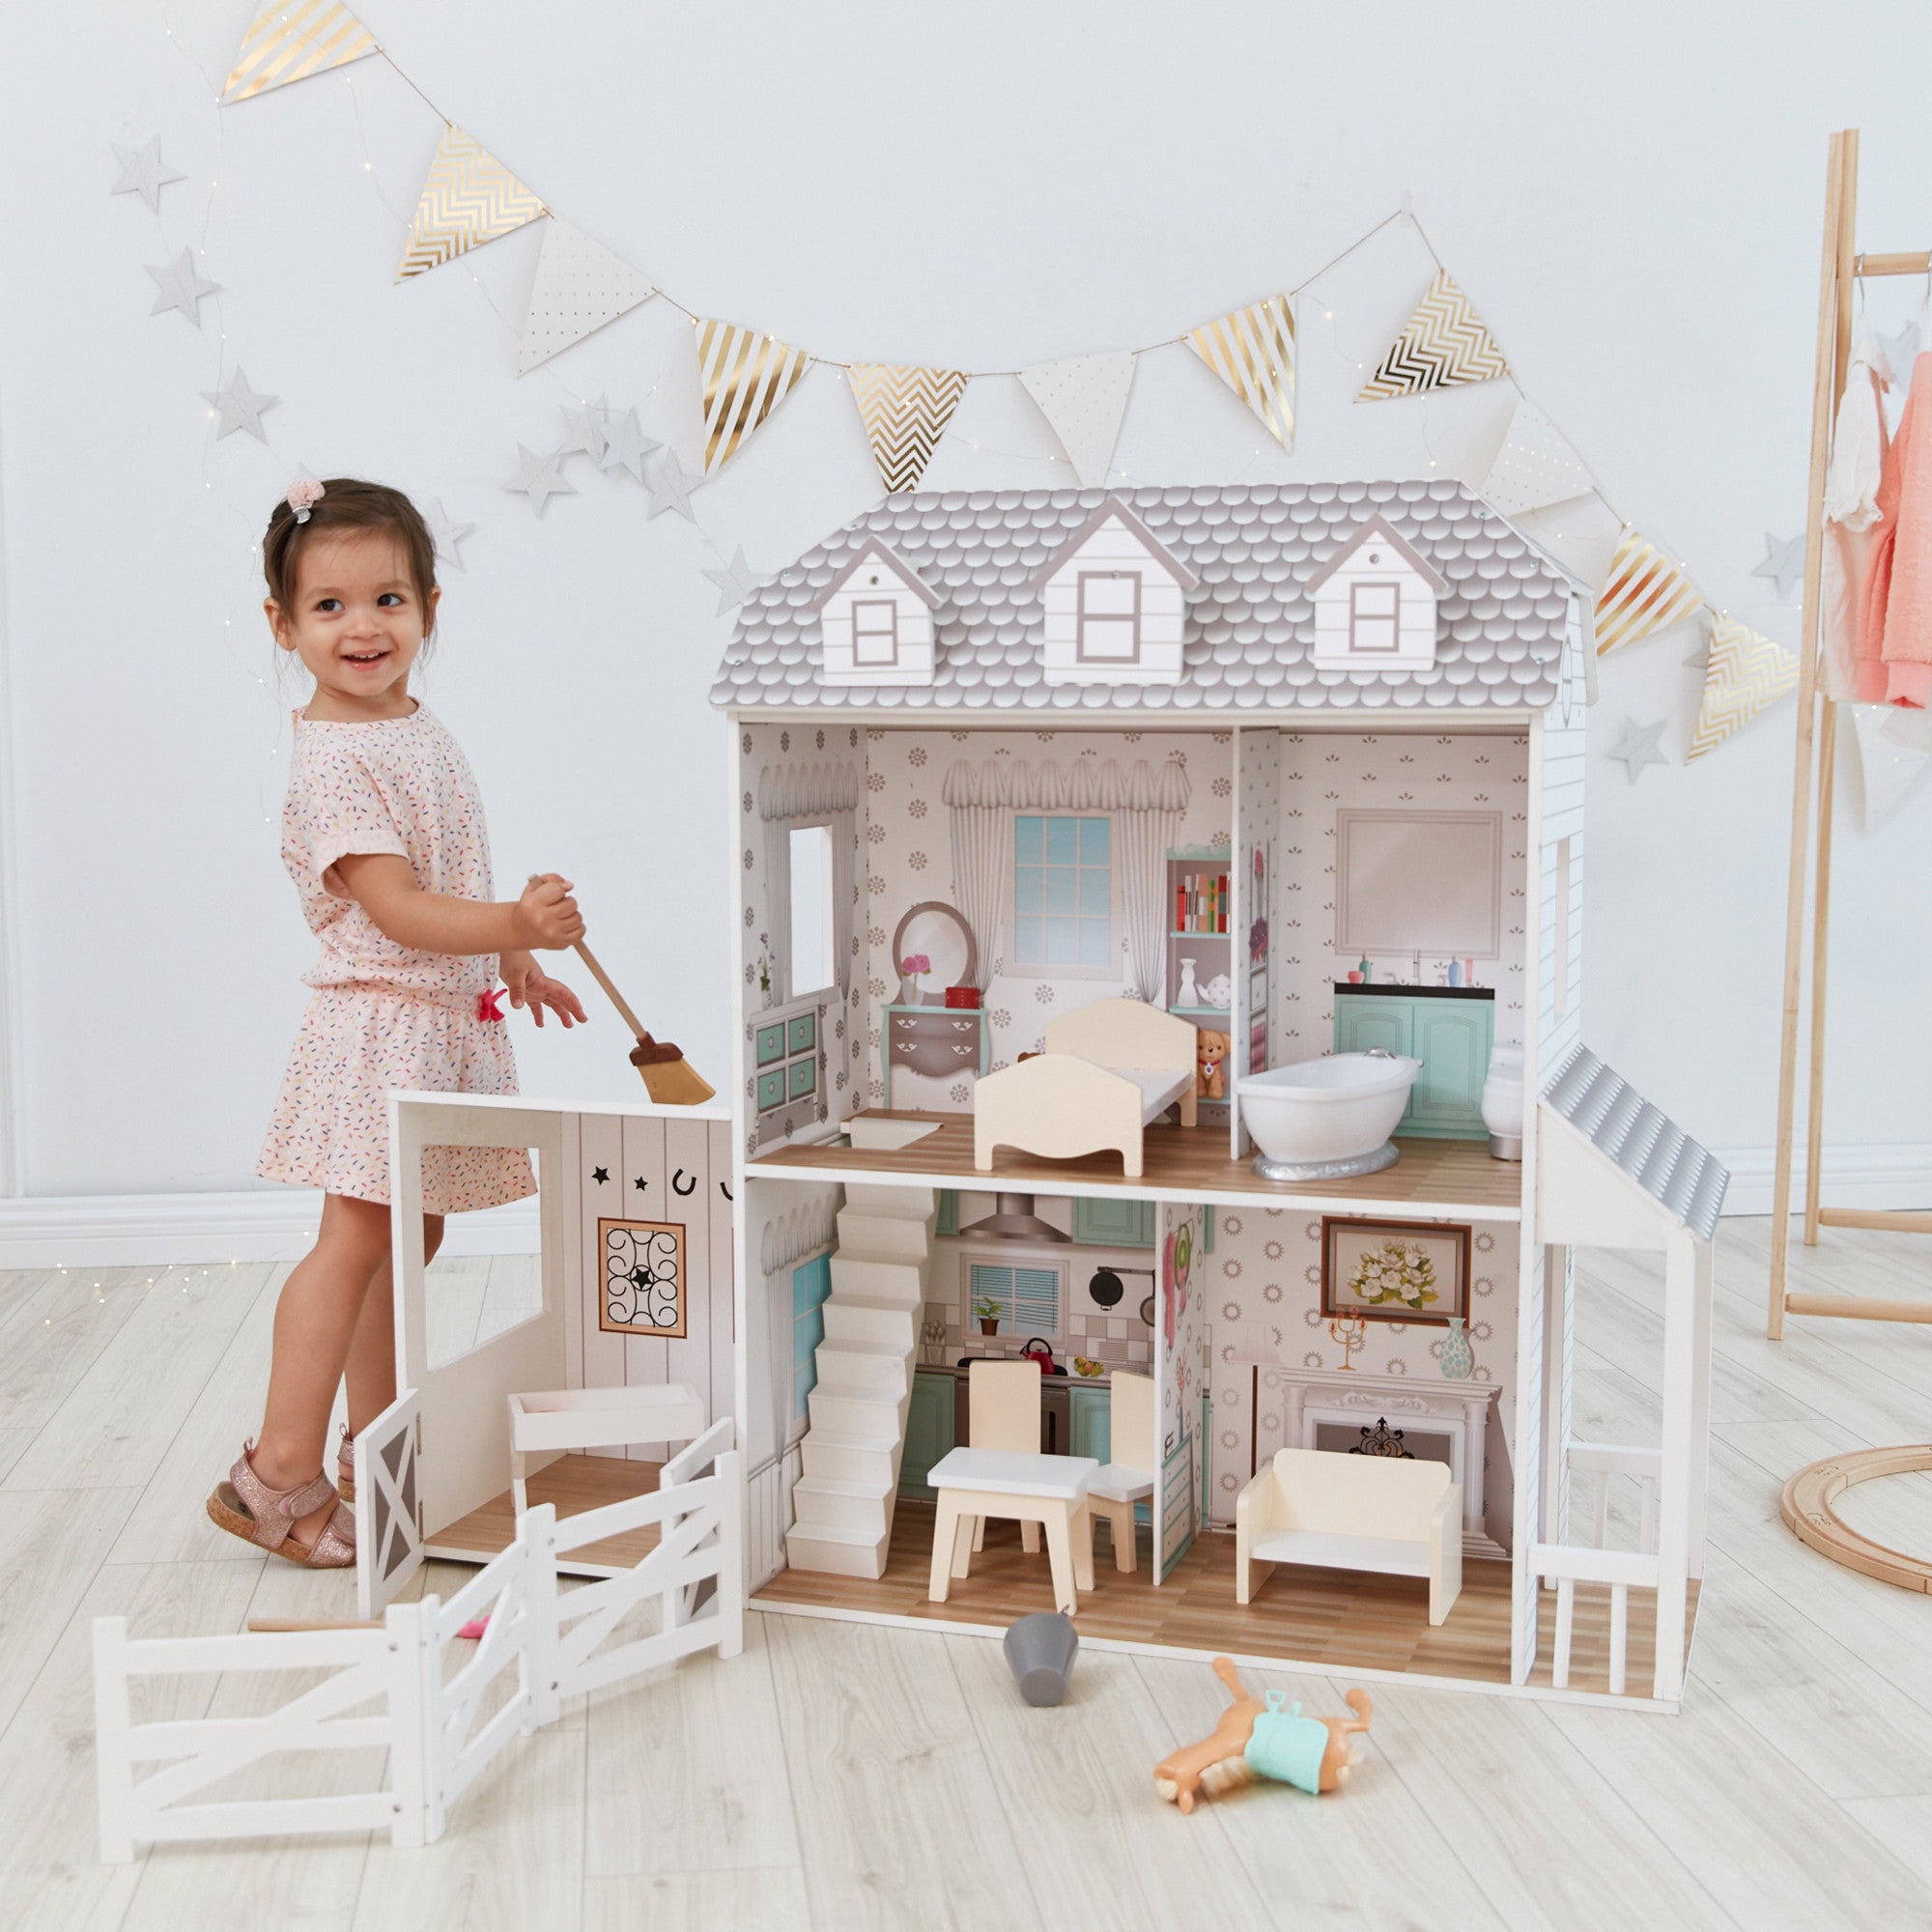 Toddler girl standing in front of a large doll house. Doll House has multiple rooms with accessories and a barn.